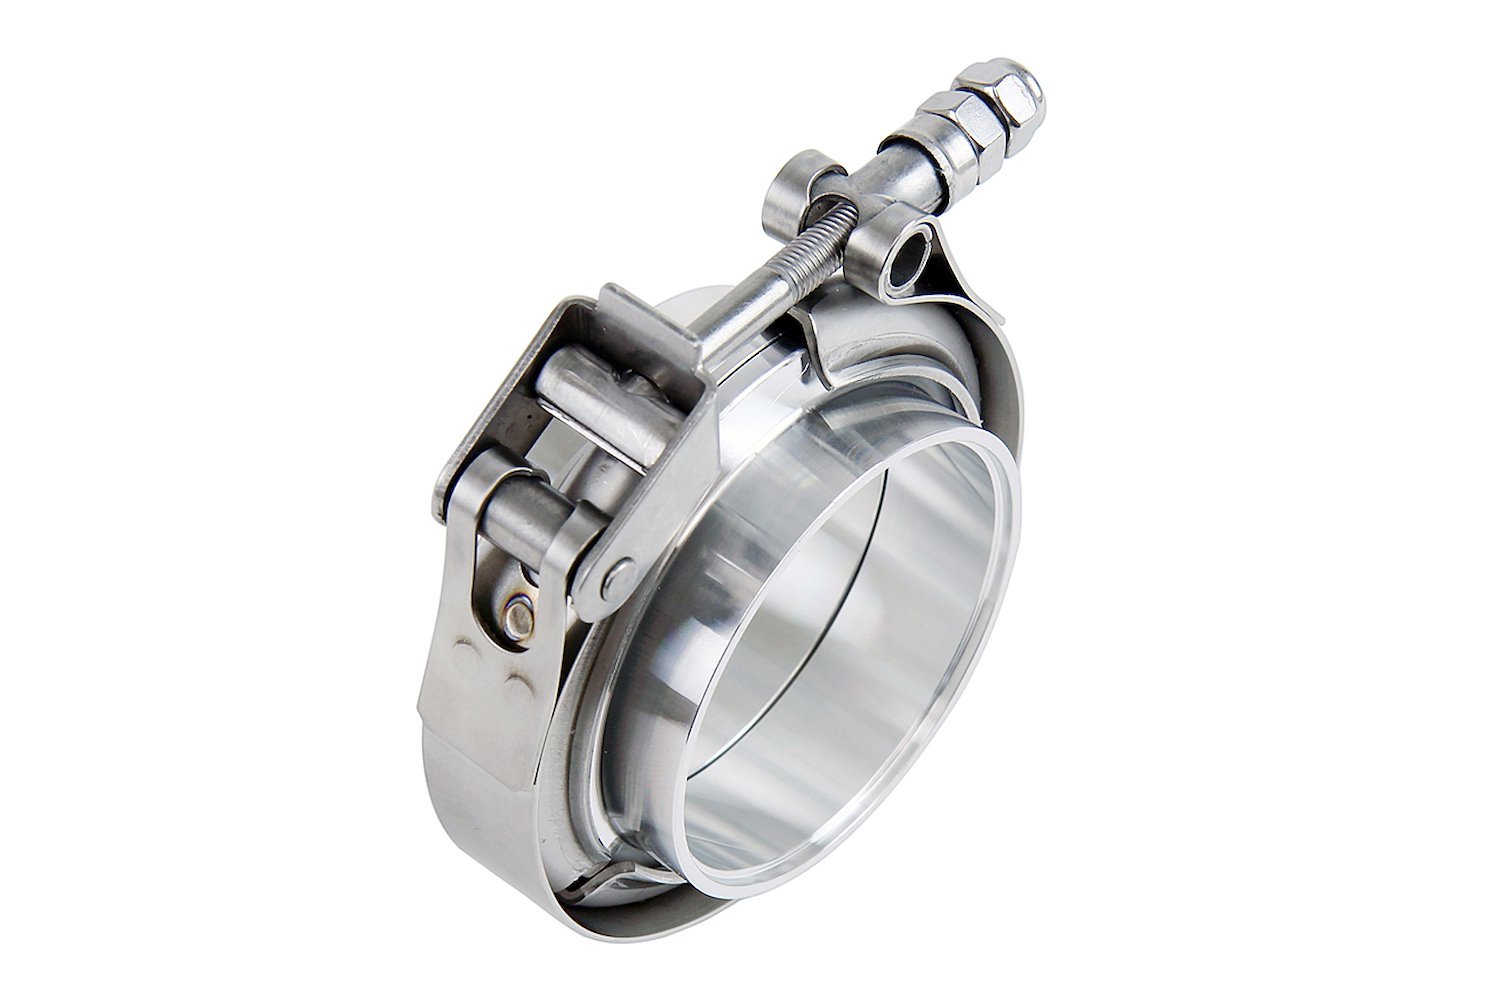 VCKIT-AL-600 V-Band Clamp w/ Interlocking Aluminum Flanges, For 6 in. OD Tubing.